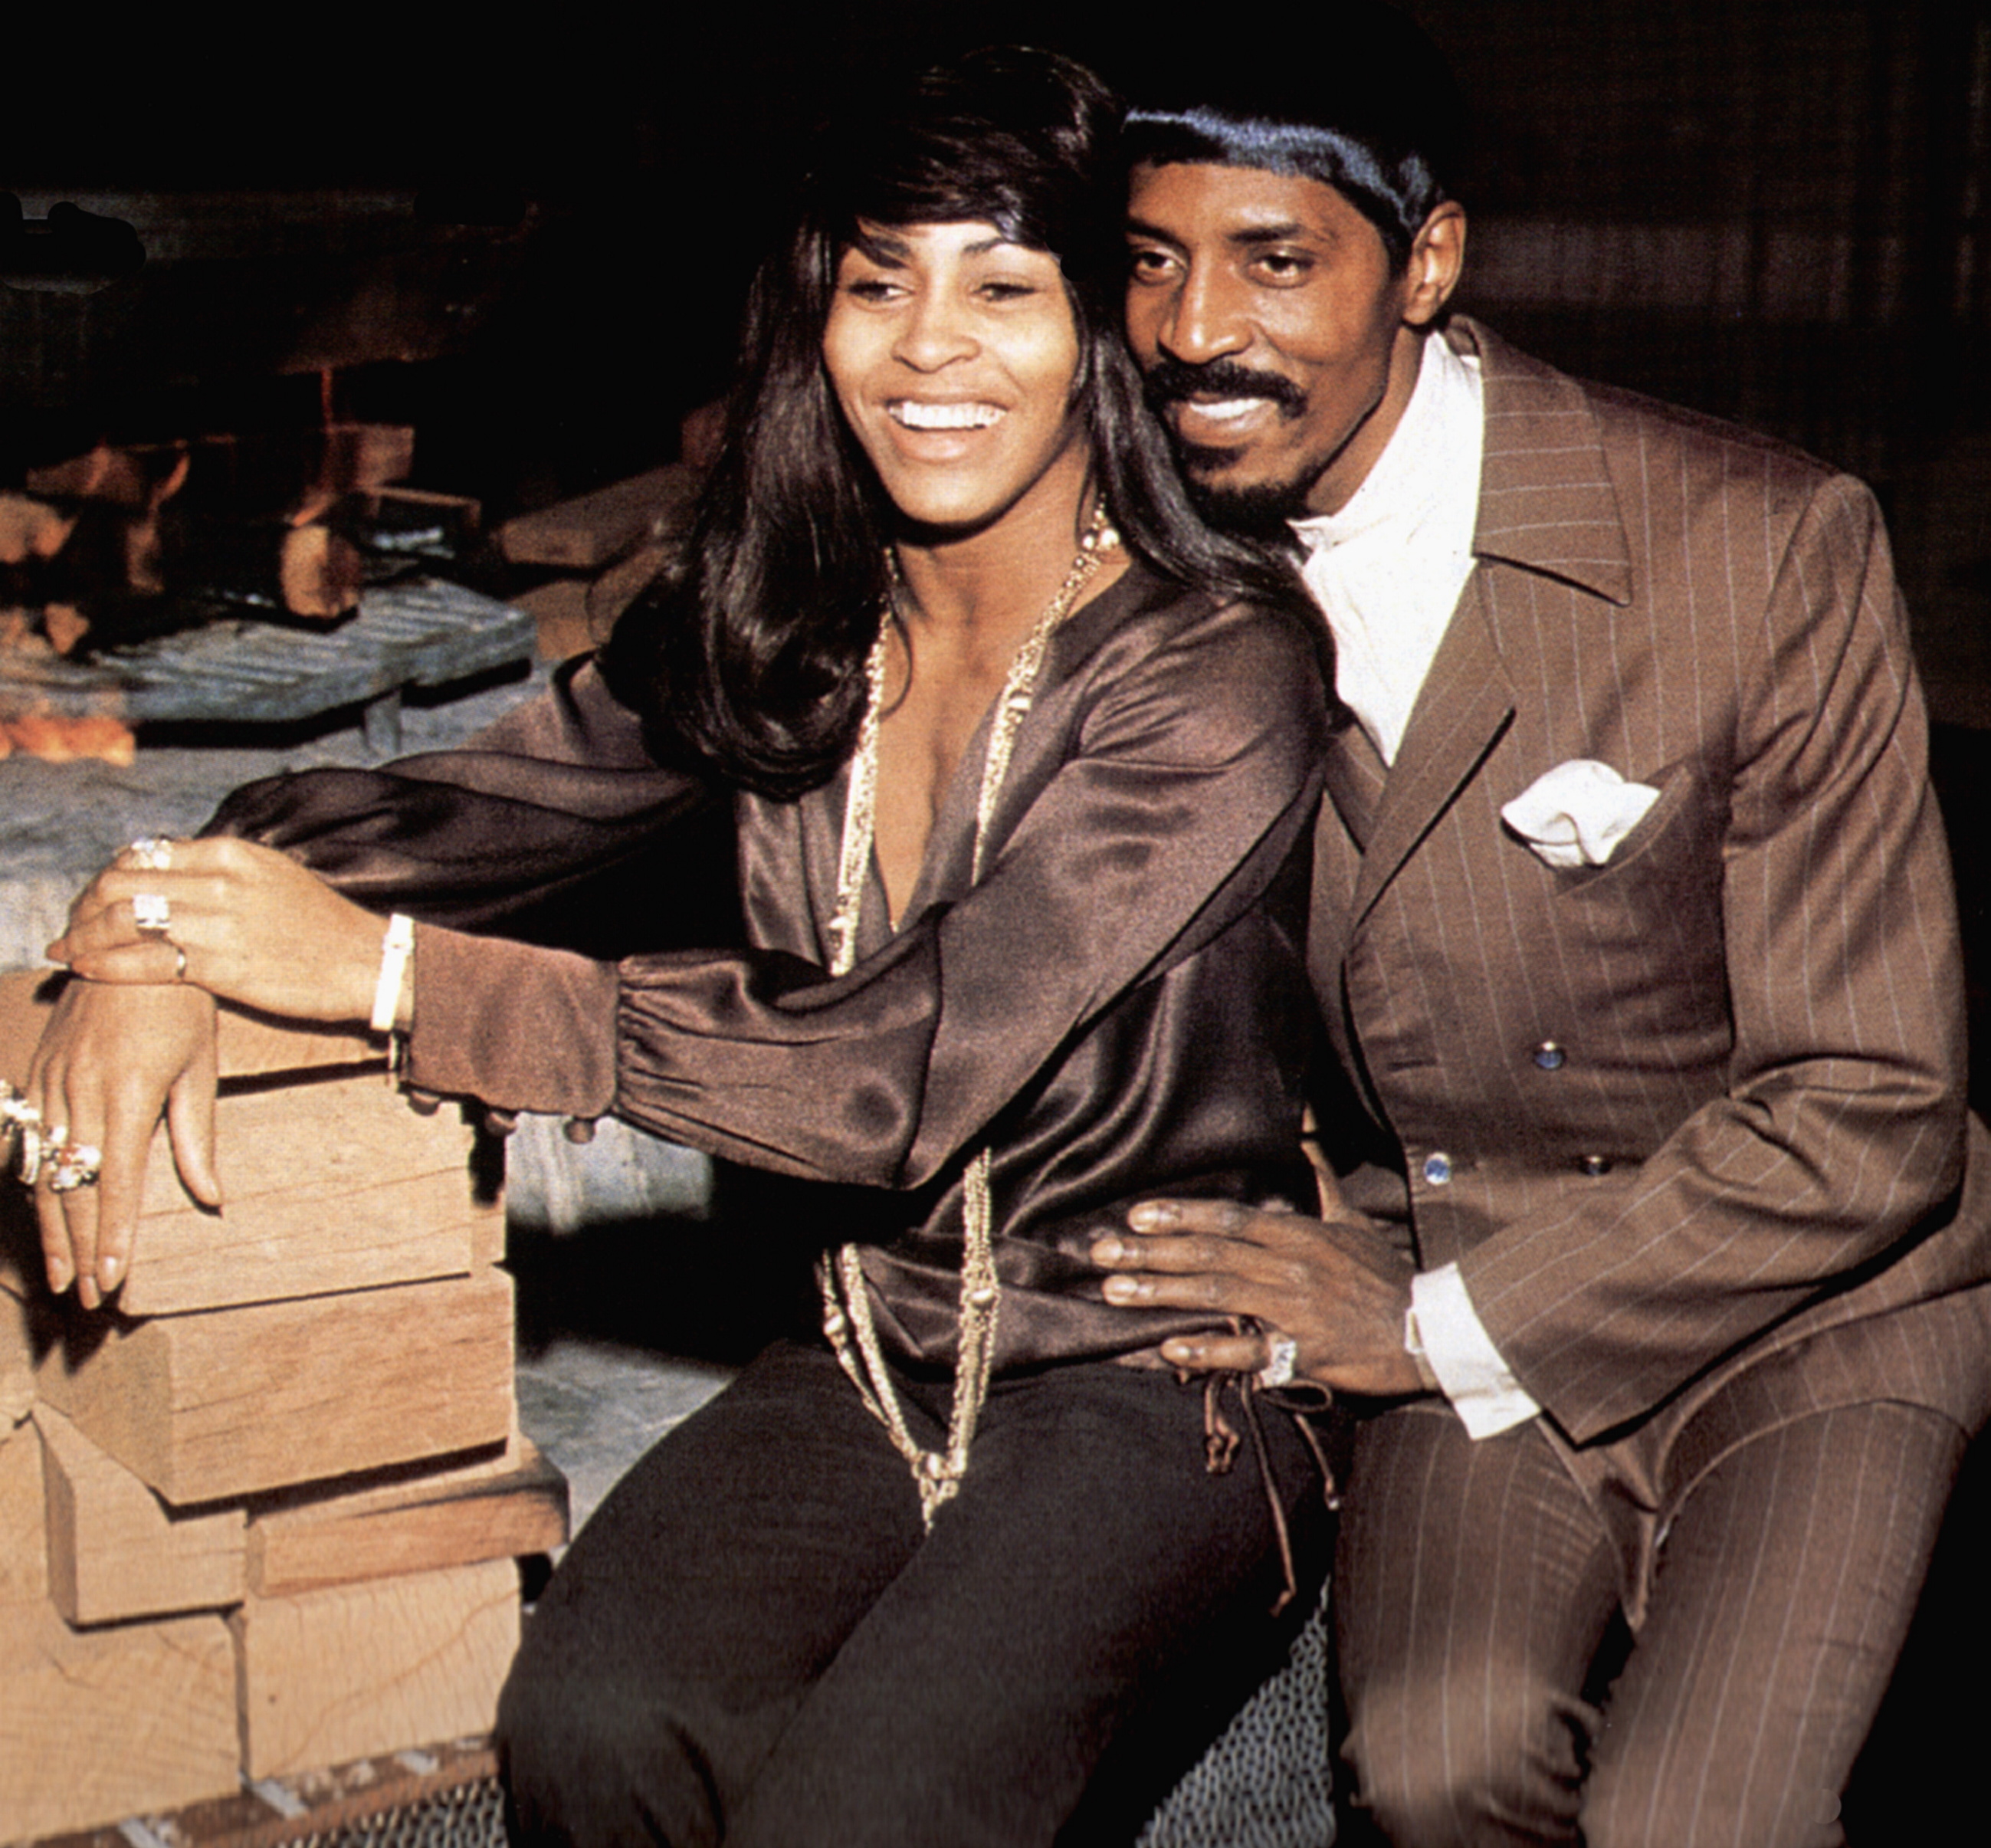 Tina Turner and Ike Turner posing together in 1966 | Source: Getty Images